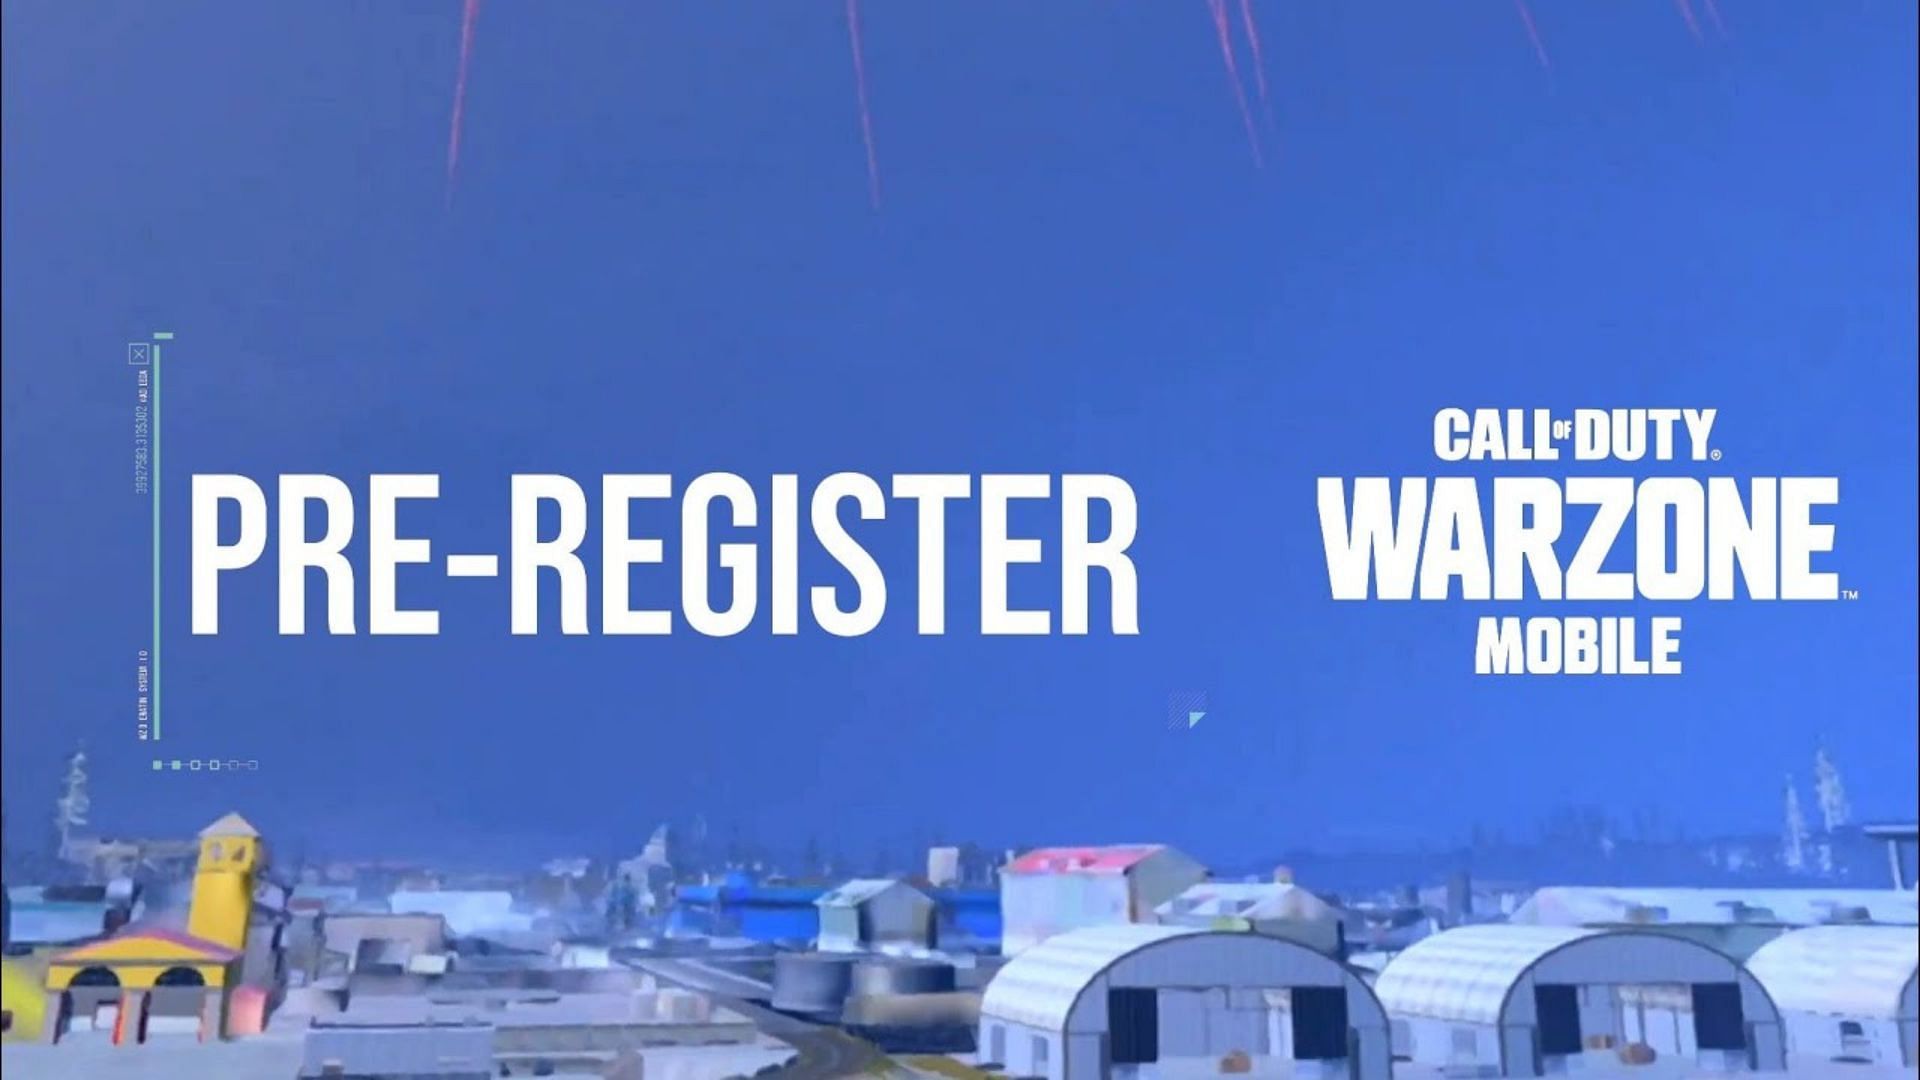 Warzone Mobile begins its pre registration for Android users (Image via Activision)